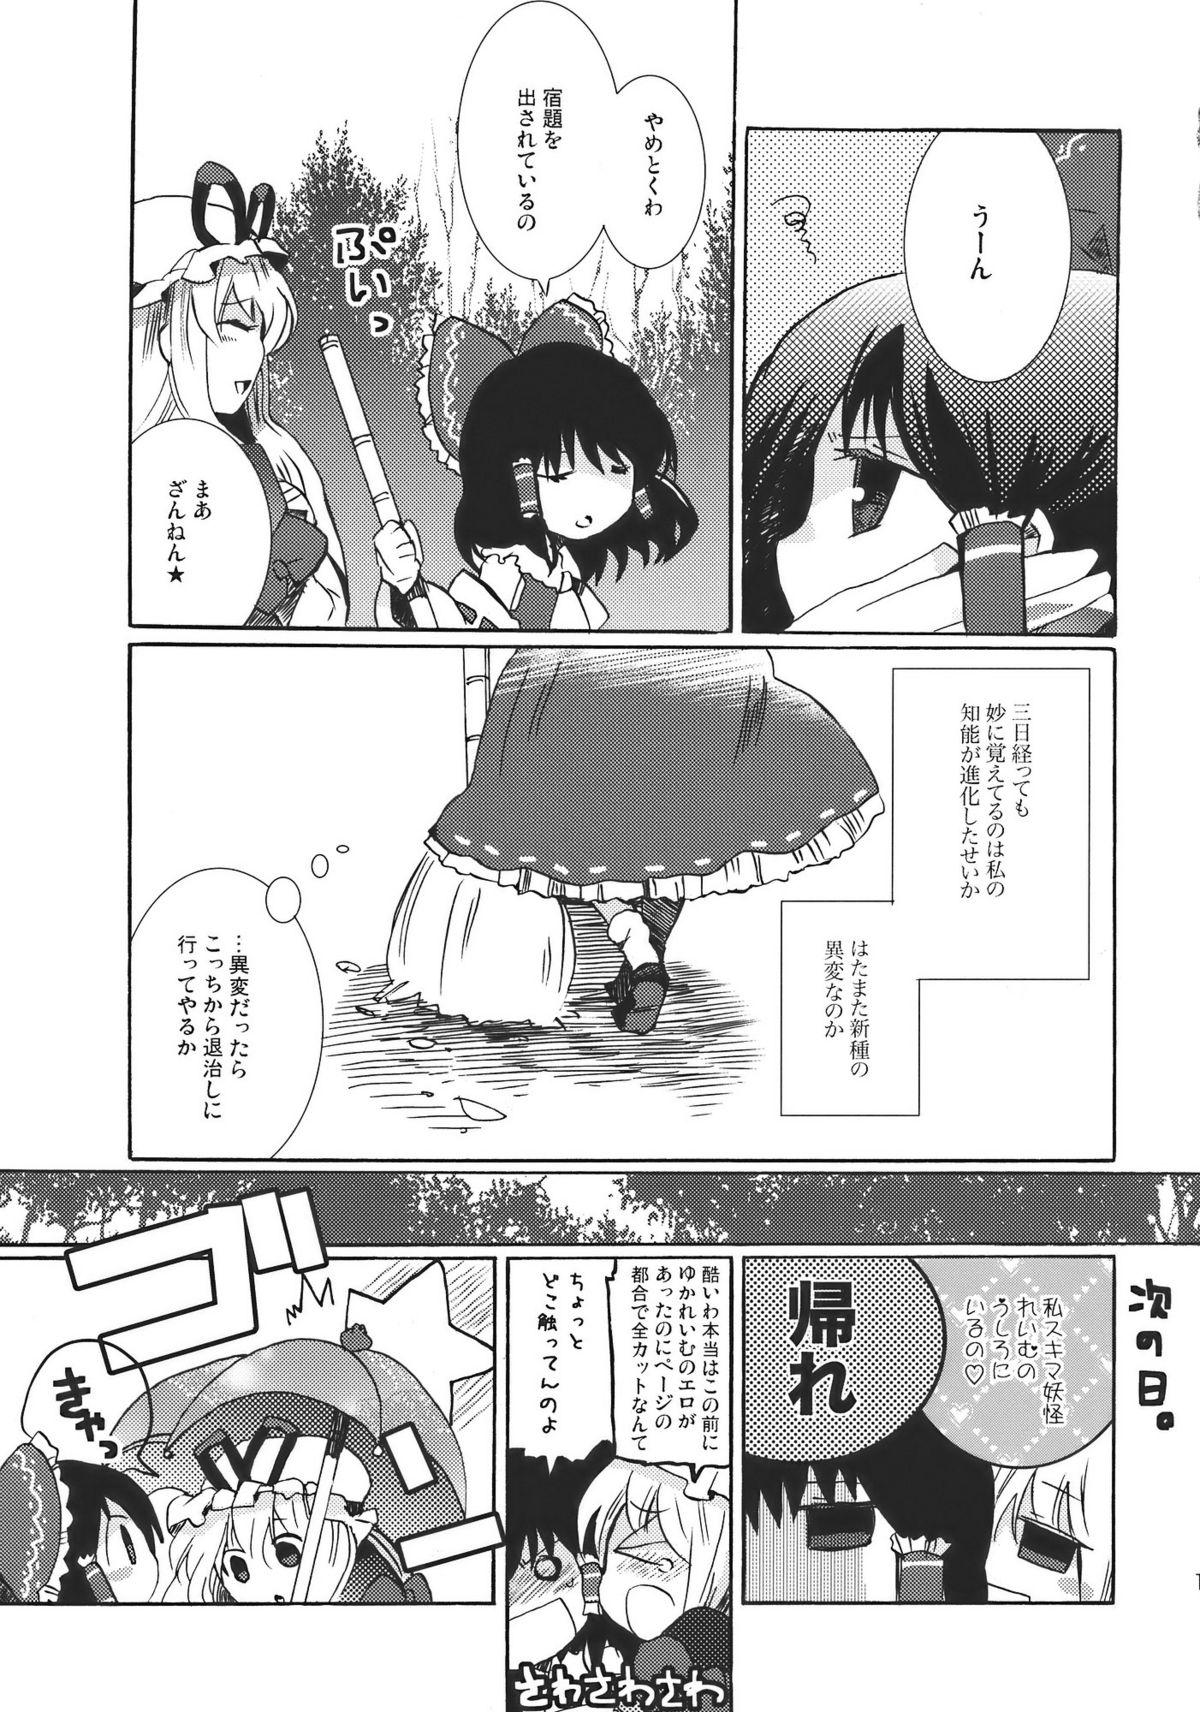 Ladyboy Yumeiro Dolce - Touhou project Best Blowjobs Ever - Page 11